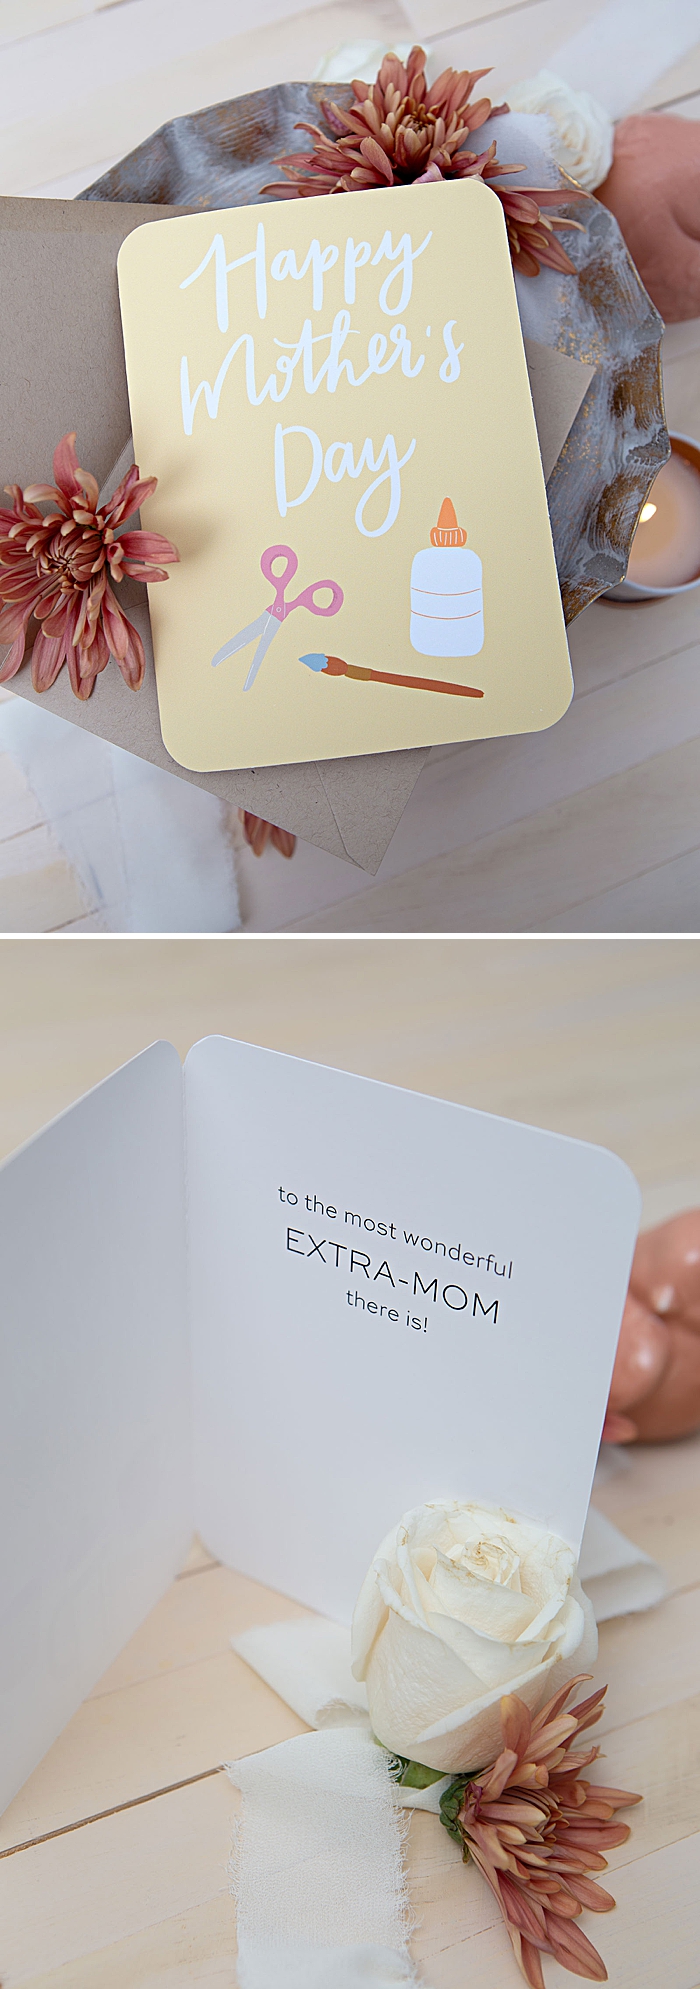 Free printable mother's day cards with custom inside sayings!